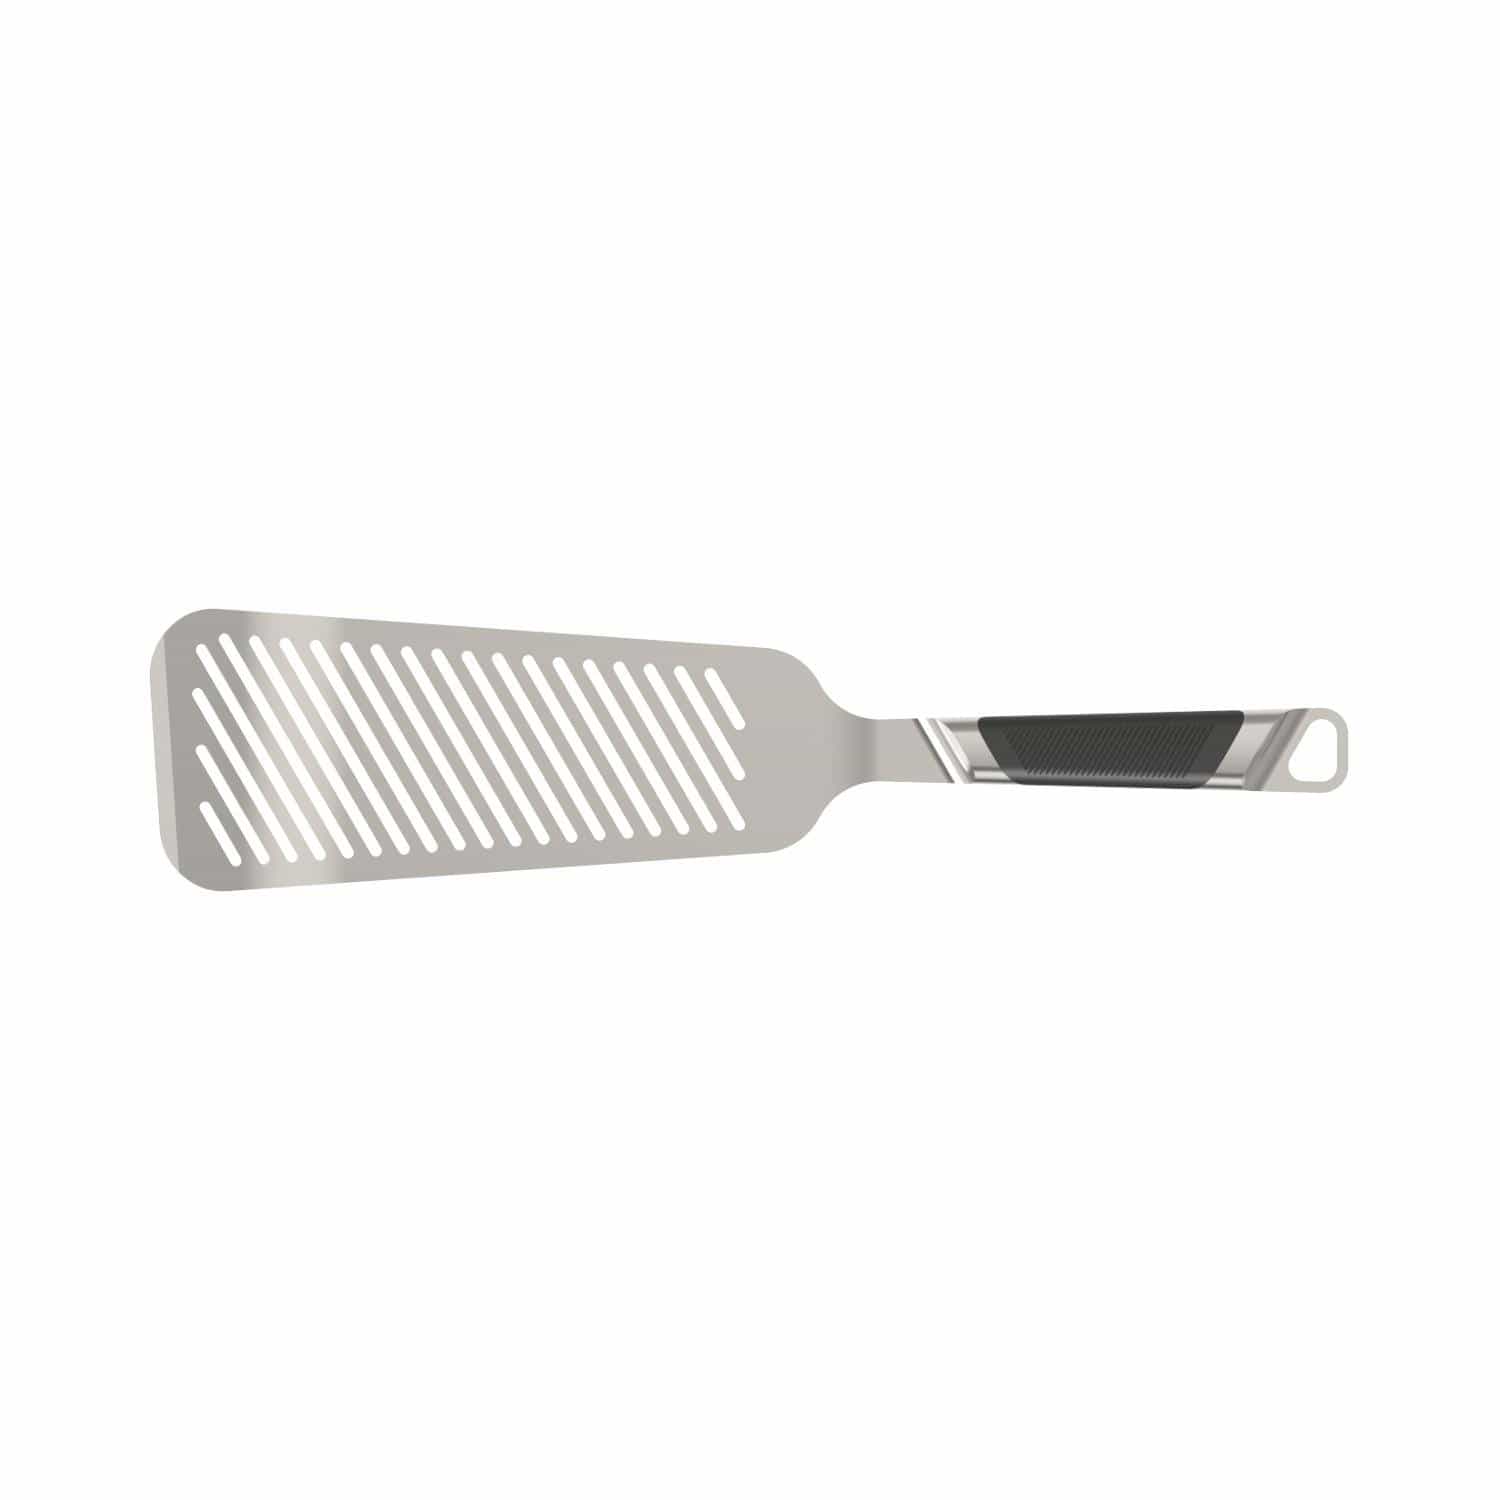 Everdure Quantum Series Range Everdure By Heston Blumenthal Brushed Stainless Steel Fish Turner With Soft Grip - Large